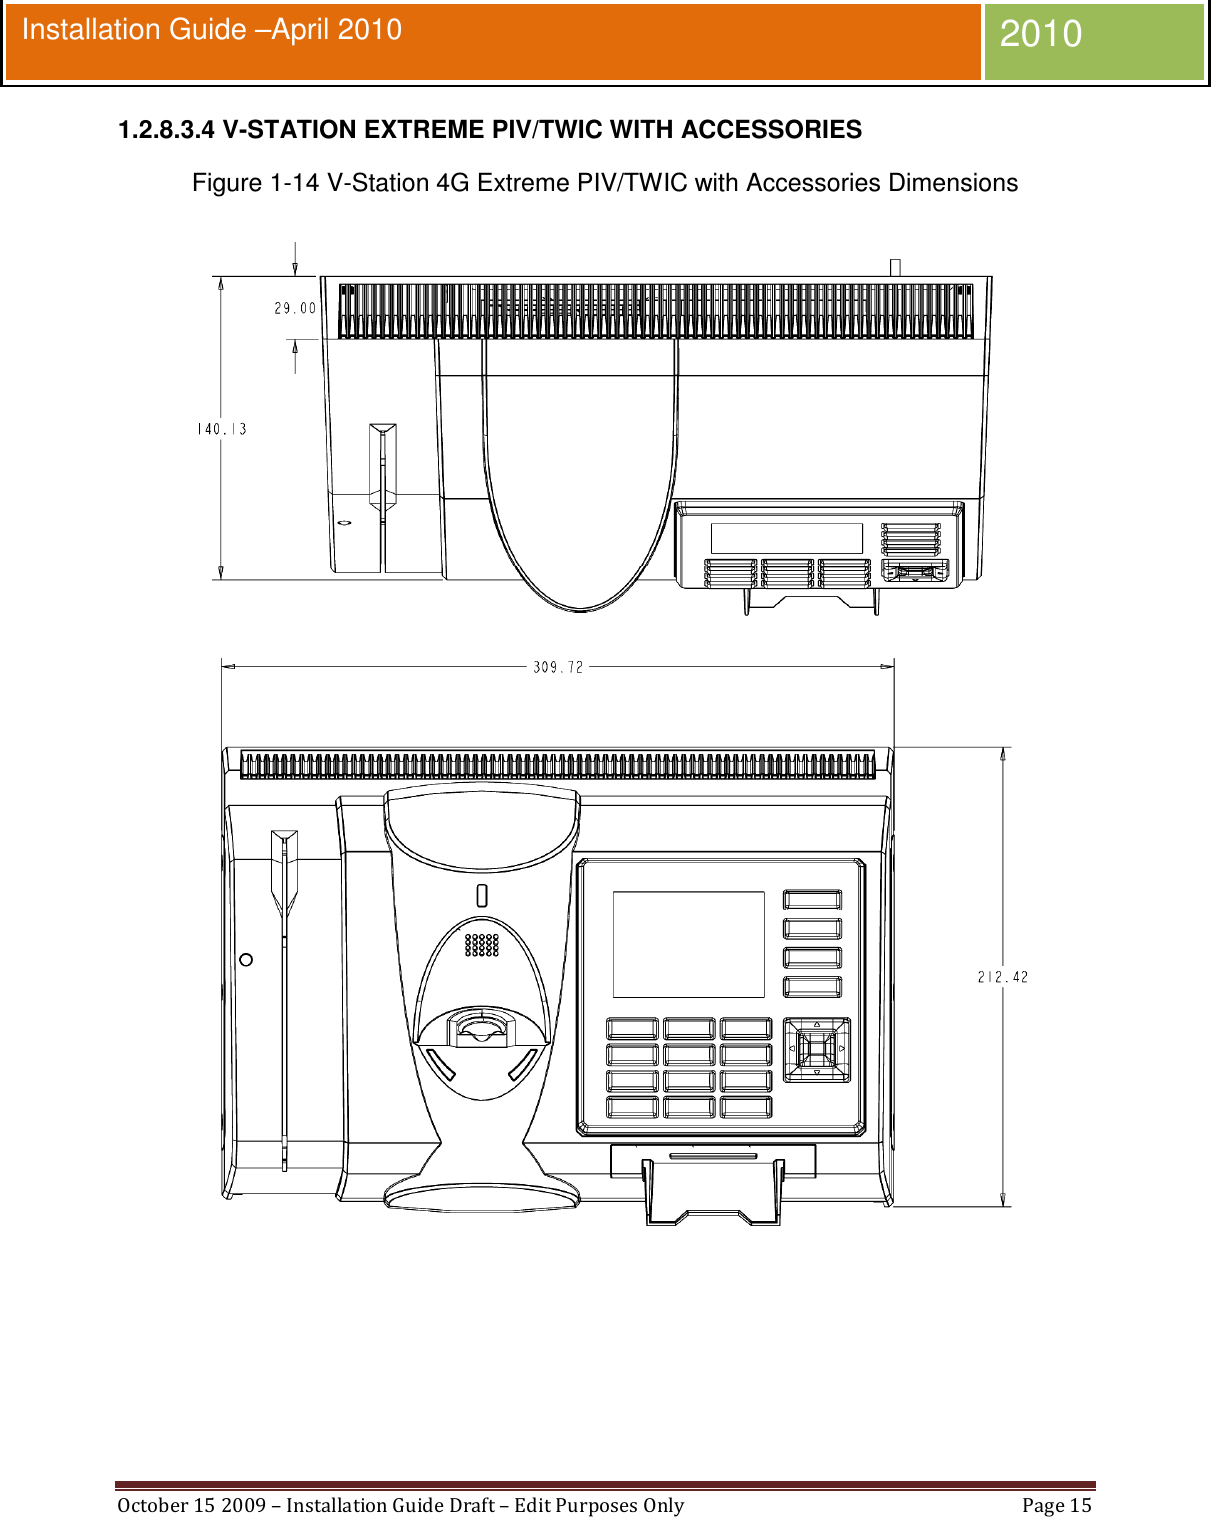  October 15 2009 – Installation Guide Draft – Edit Purposes Only  Page 15  Installation Guide –April 2010 2010 1.2.8.3.4 V-STATION EXTREME PIV/TWIC WITH ACCESSORIES Figure 1-14 V-Station 4G Extreme PIV/TWIC with Accessories Dimensions   